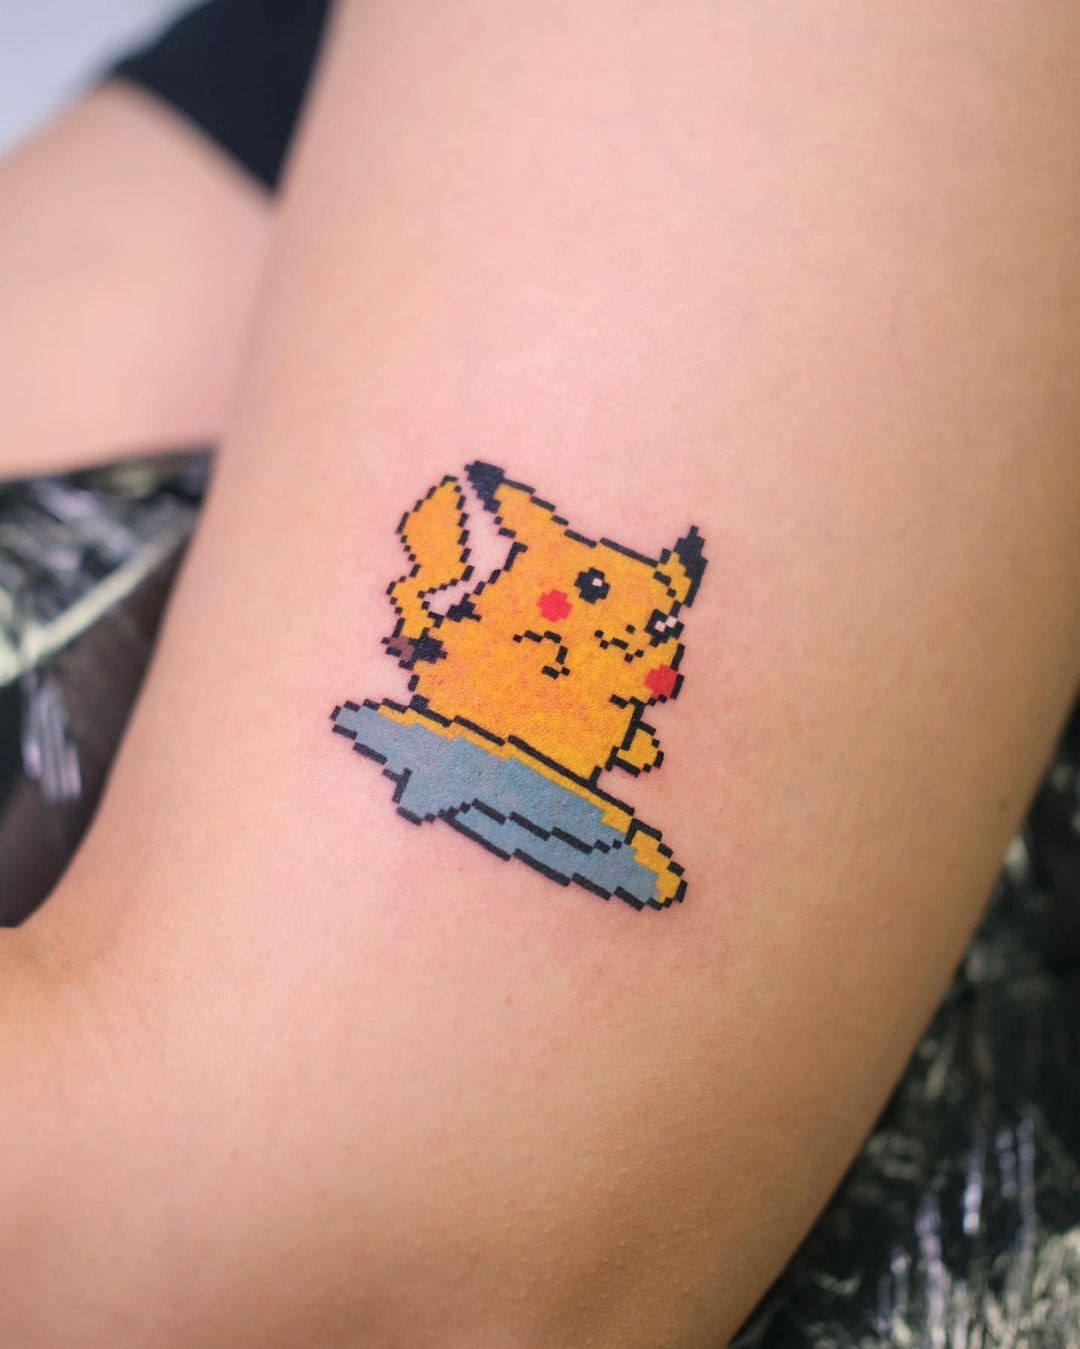 101 Awesome Pokemon Tattoo Designs You Need To See! | Pokemon tattoo, Pikachu  tattoo, Cute tattoos